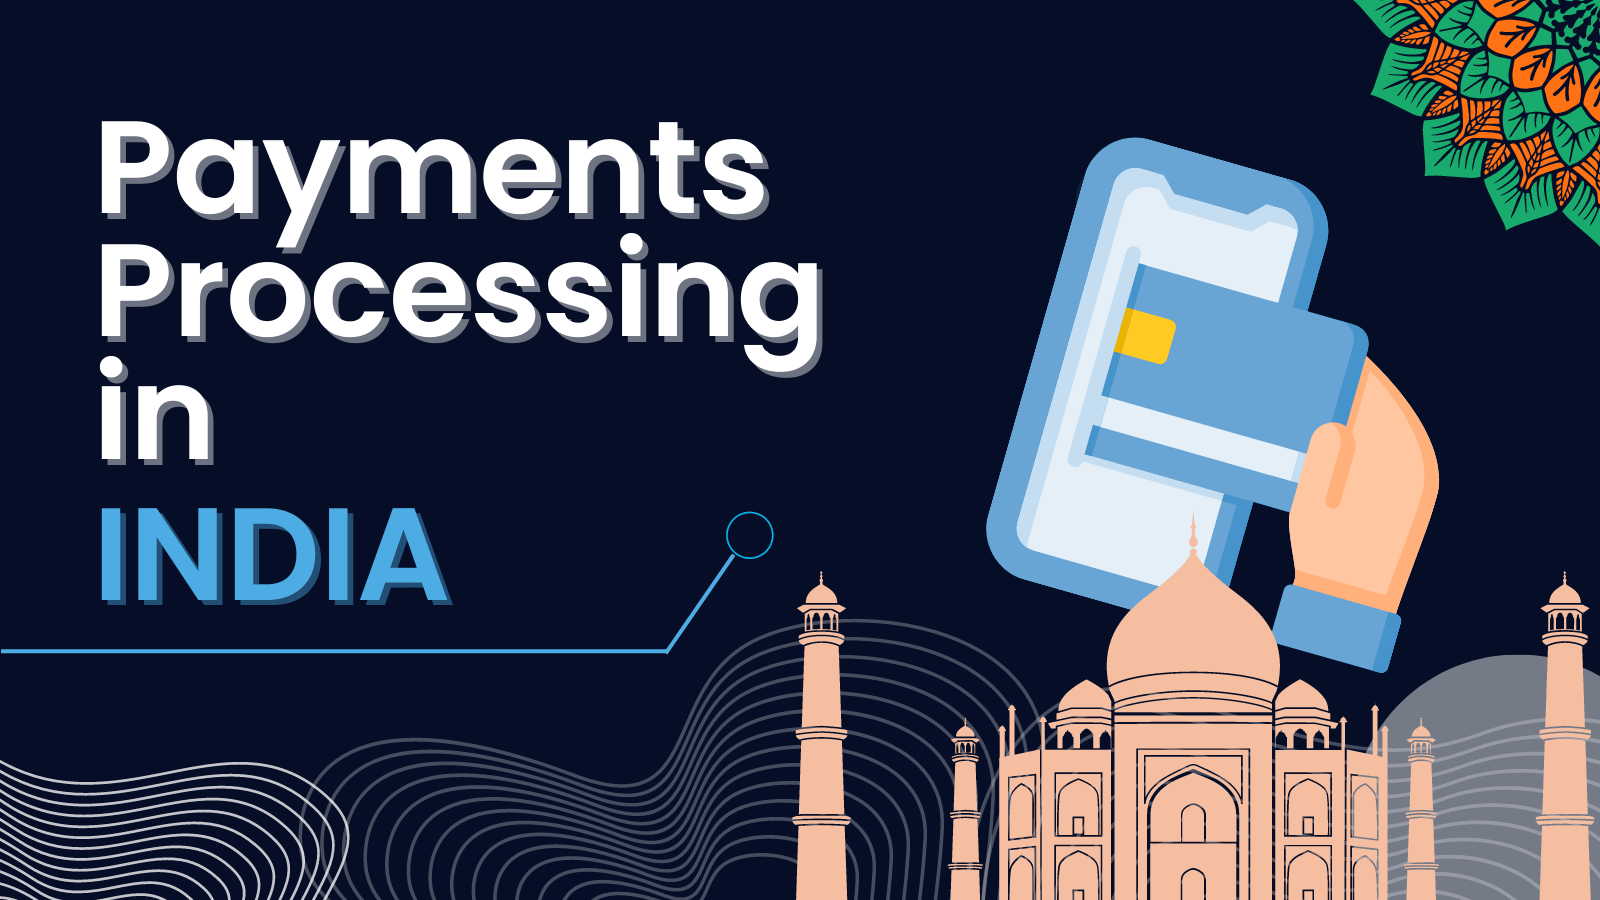 Payments Processing in India